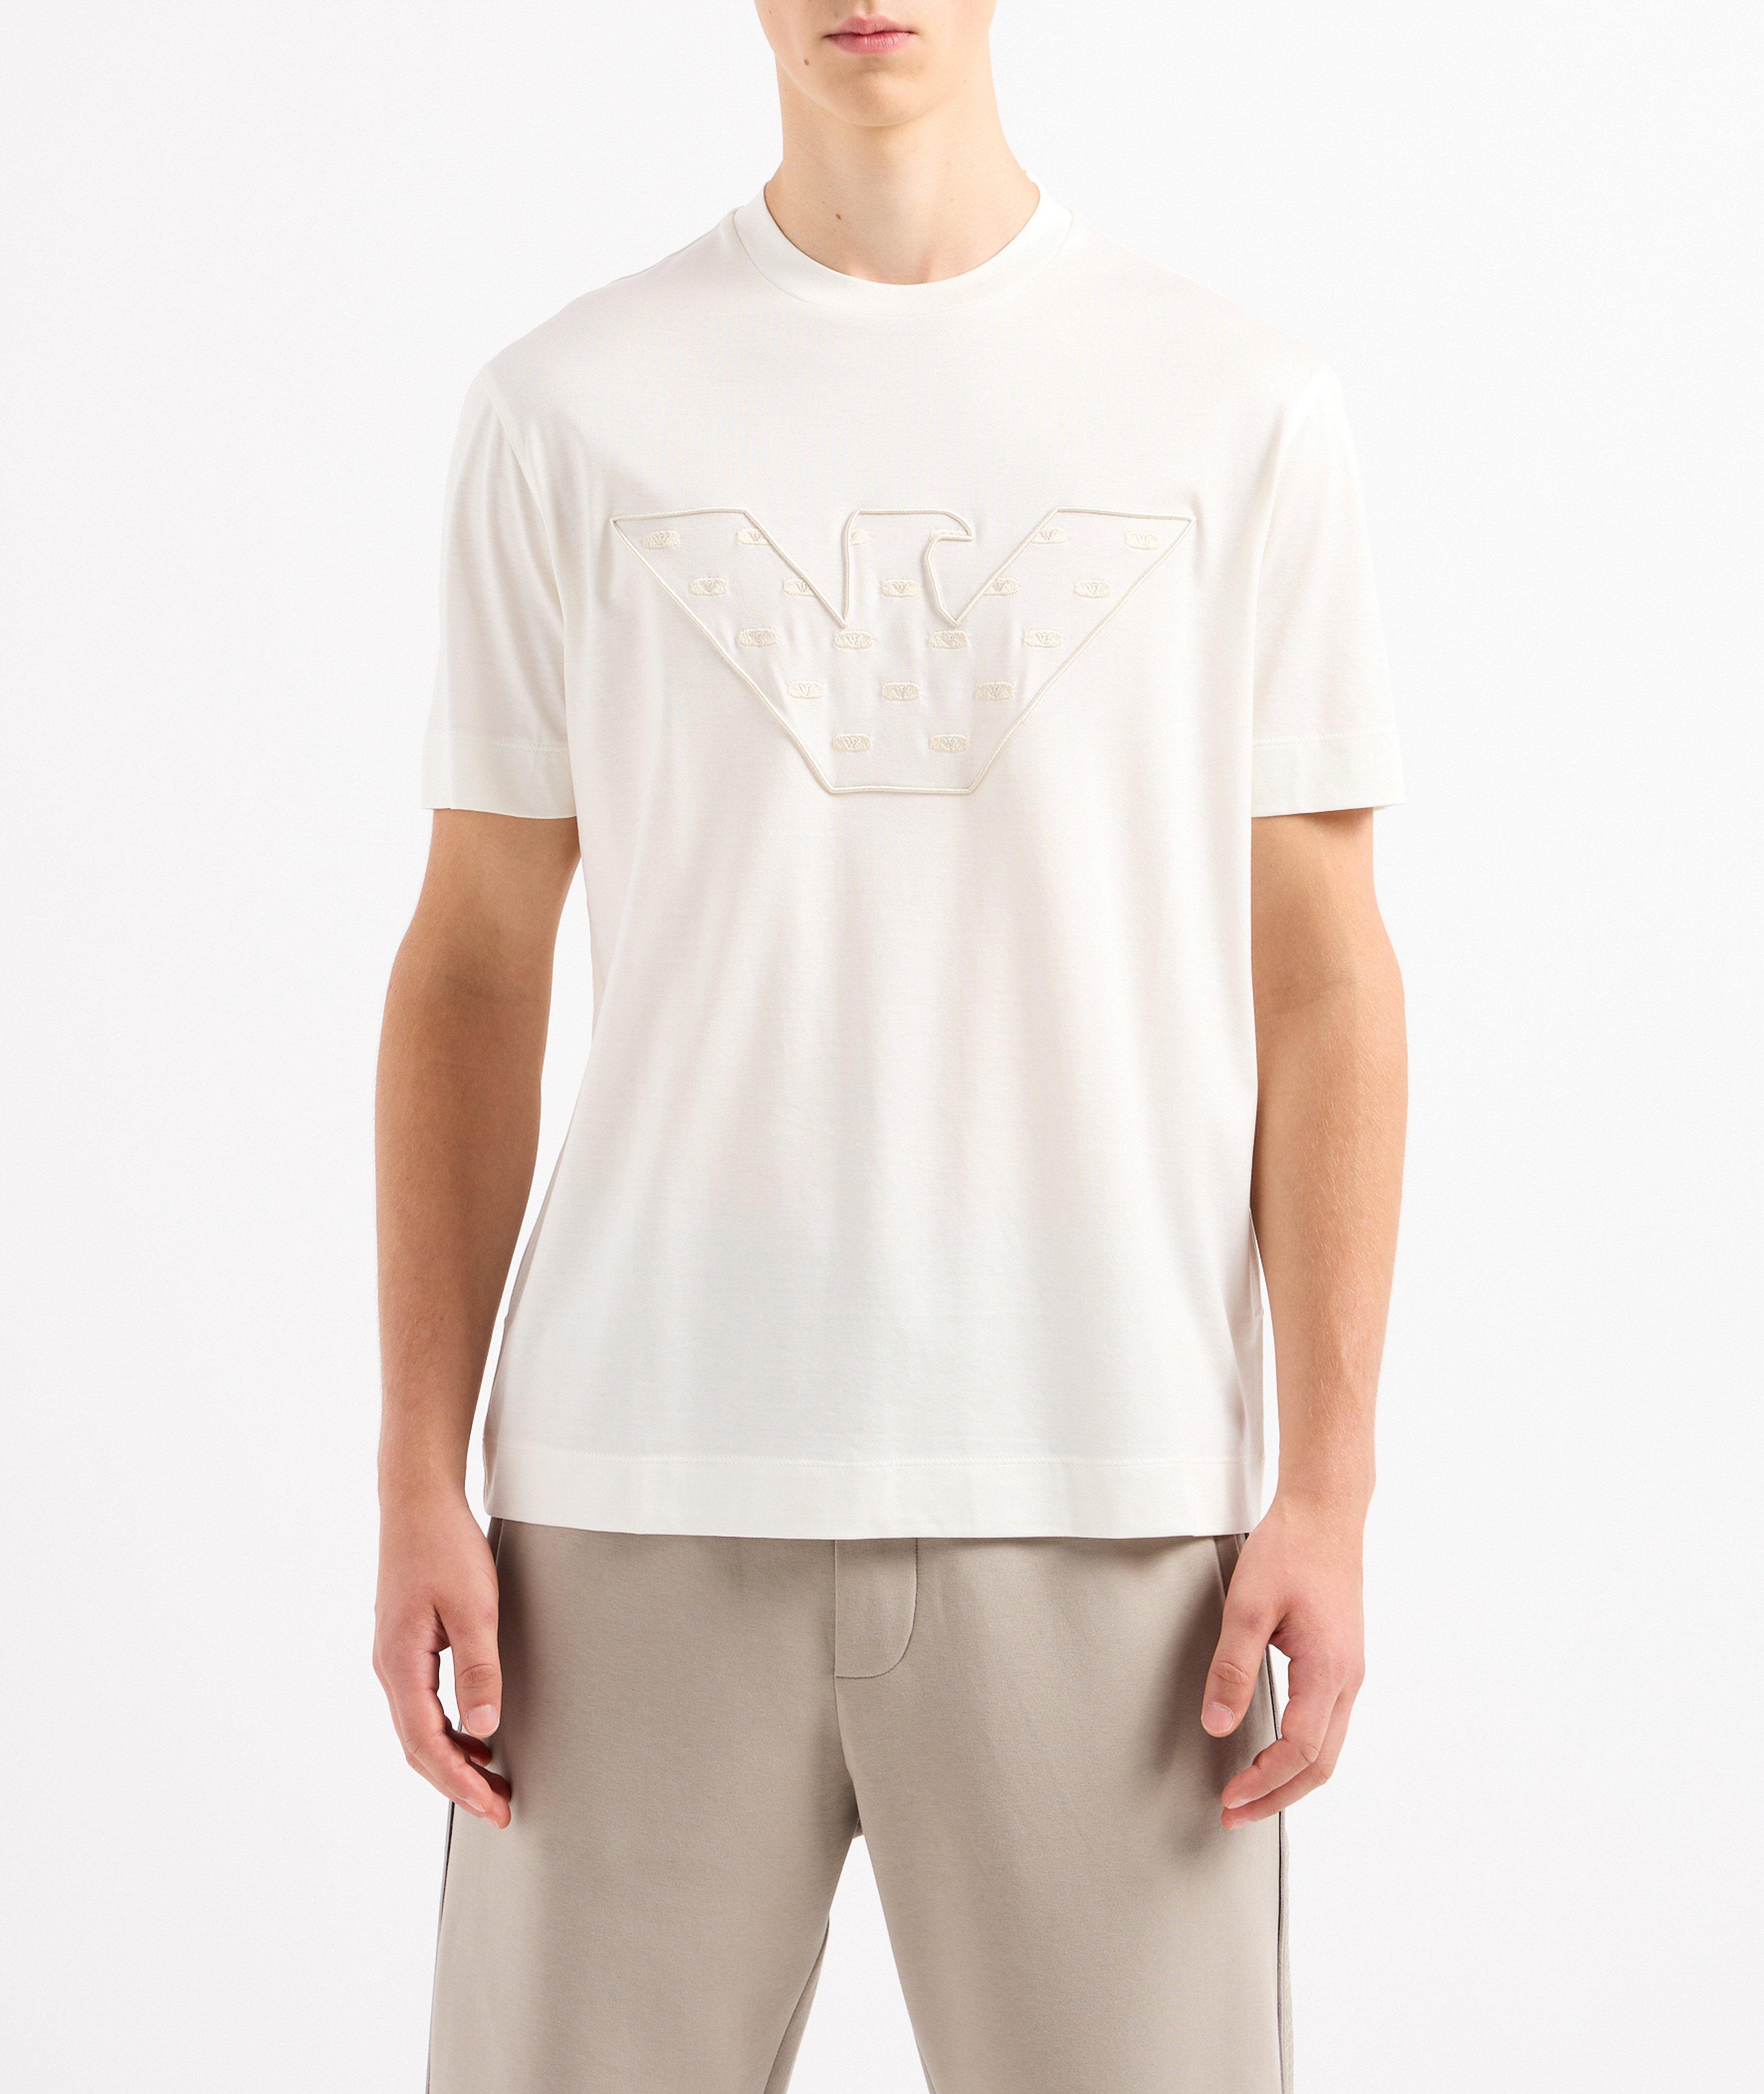 Tonal Embroidered Logo Lyocell-Cotton T-Shirt image 1